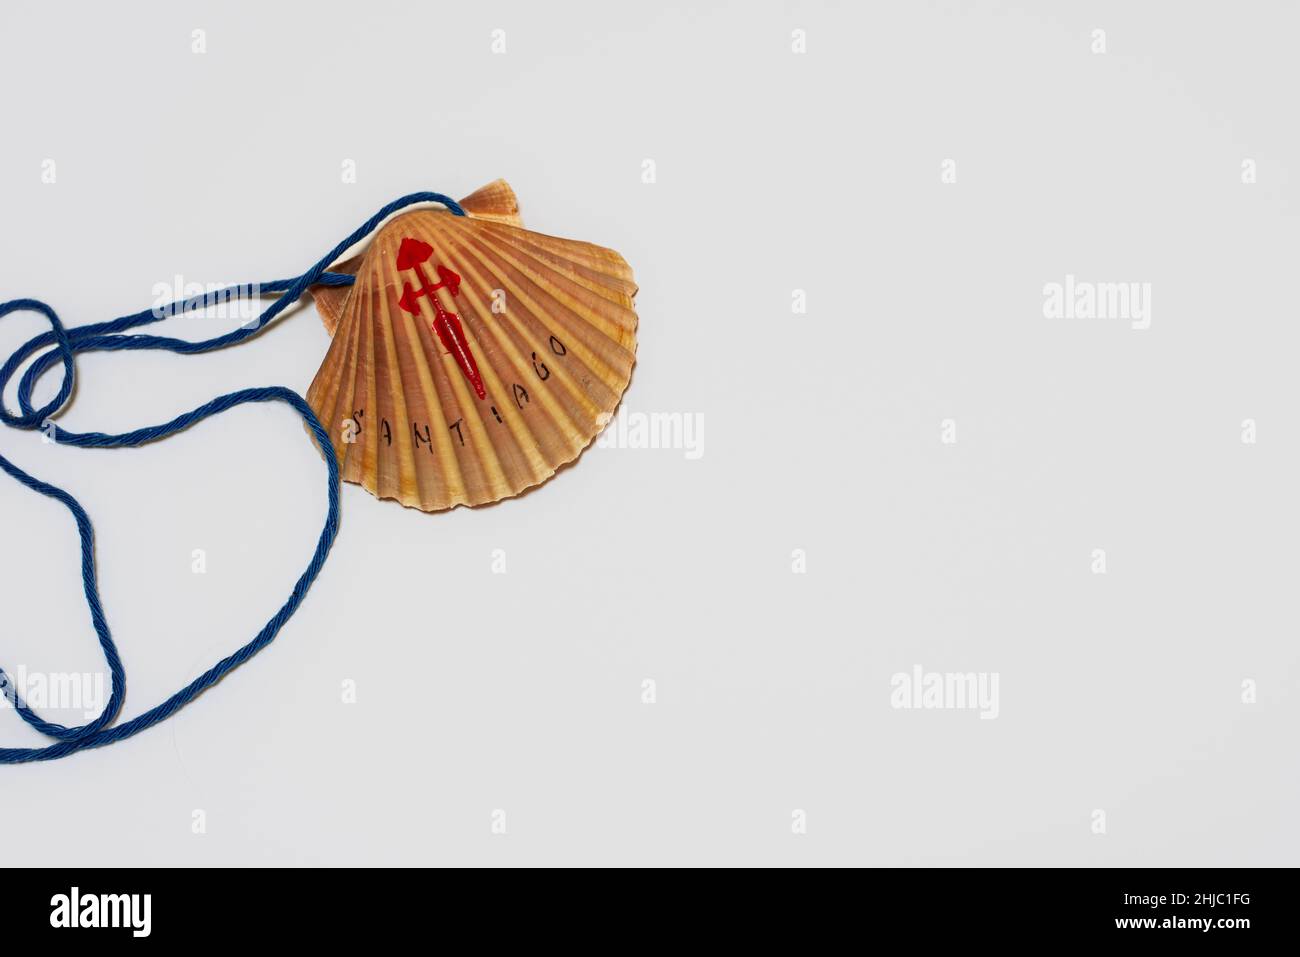 St James's shell in a blue cord on white background with space for copy, Frederikssund, Denmark, January 27, 2022 Stock Photo